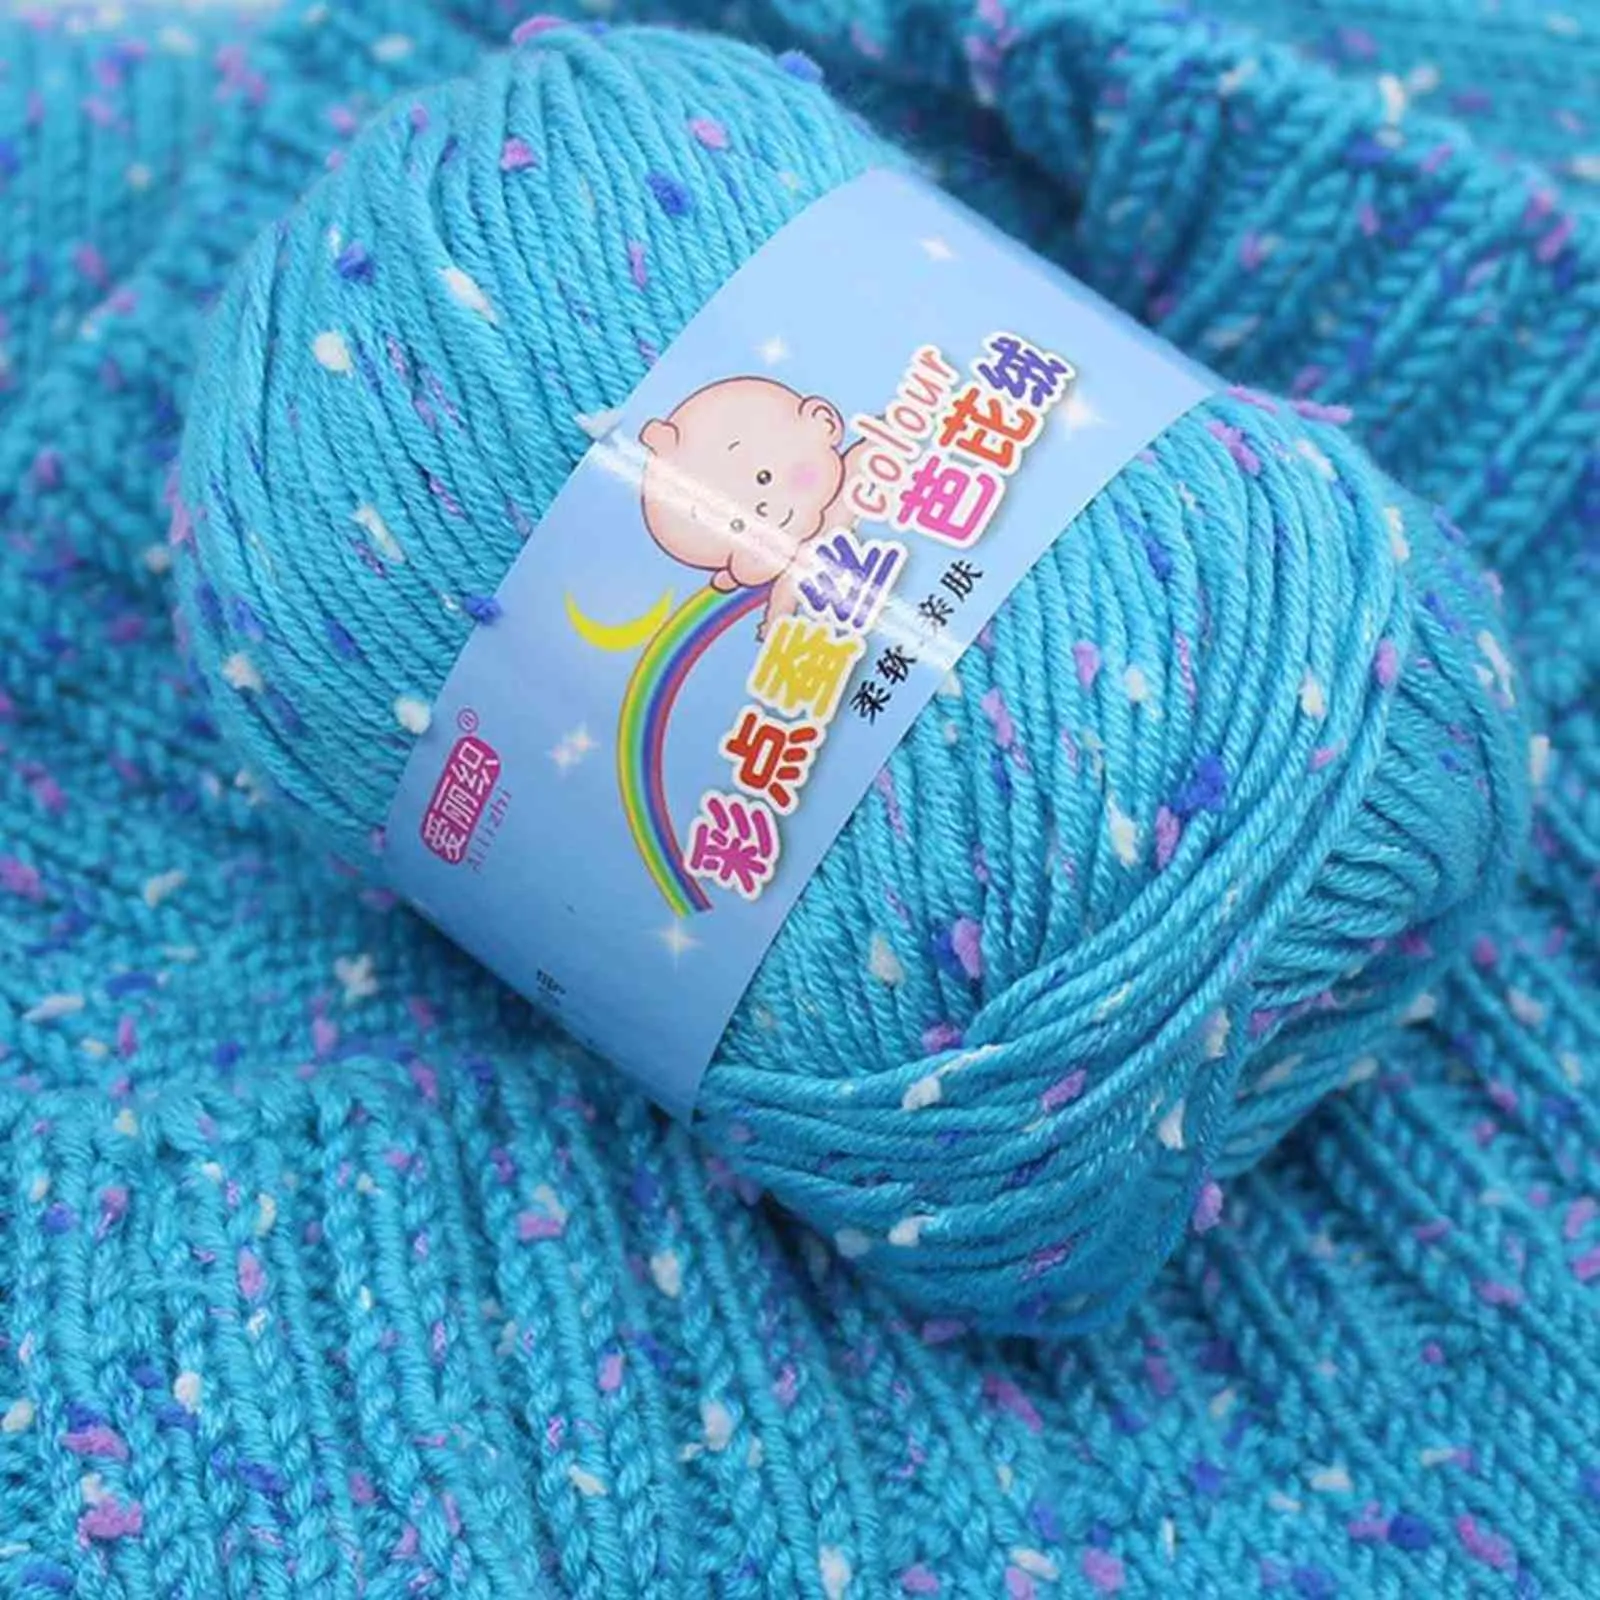 1PC High Quality Baby Cotton Cashmere Yarn For Hand Knitting Crochet Worsted Wool Thread Colorful Eco-dyed Needlework Y211129